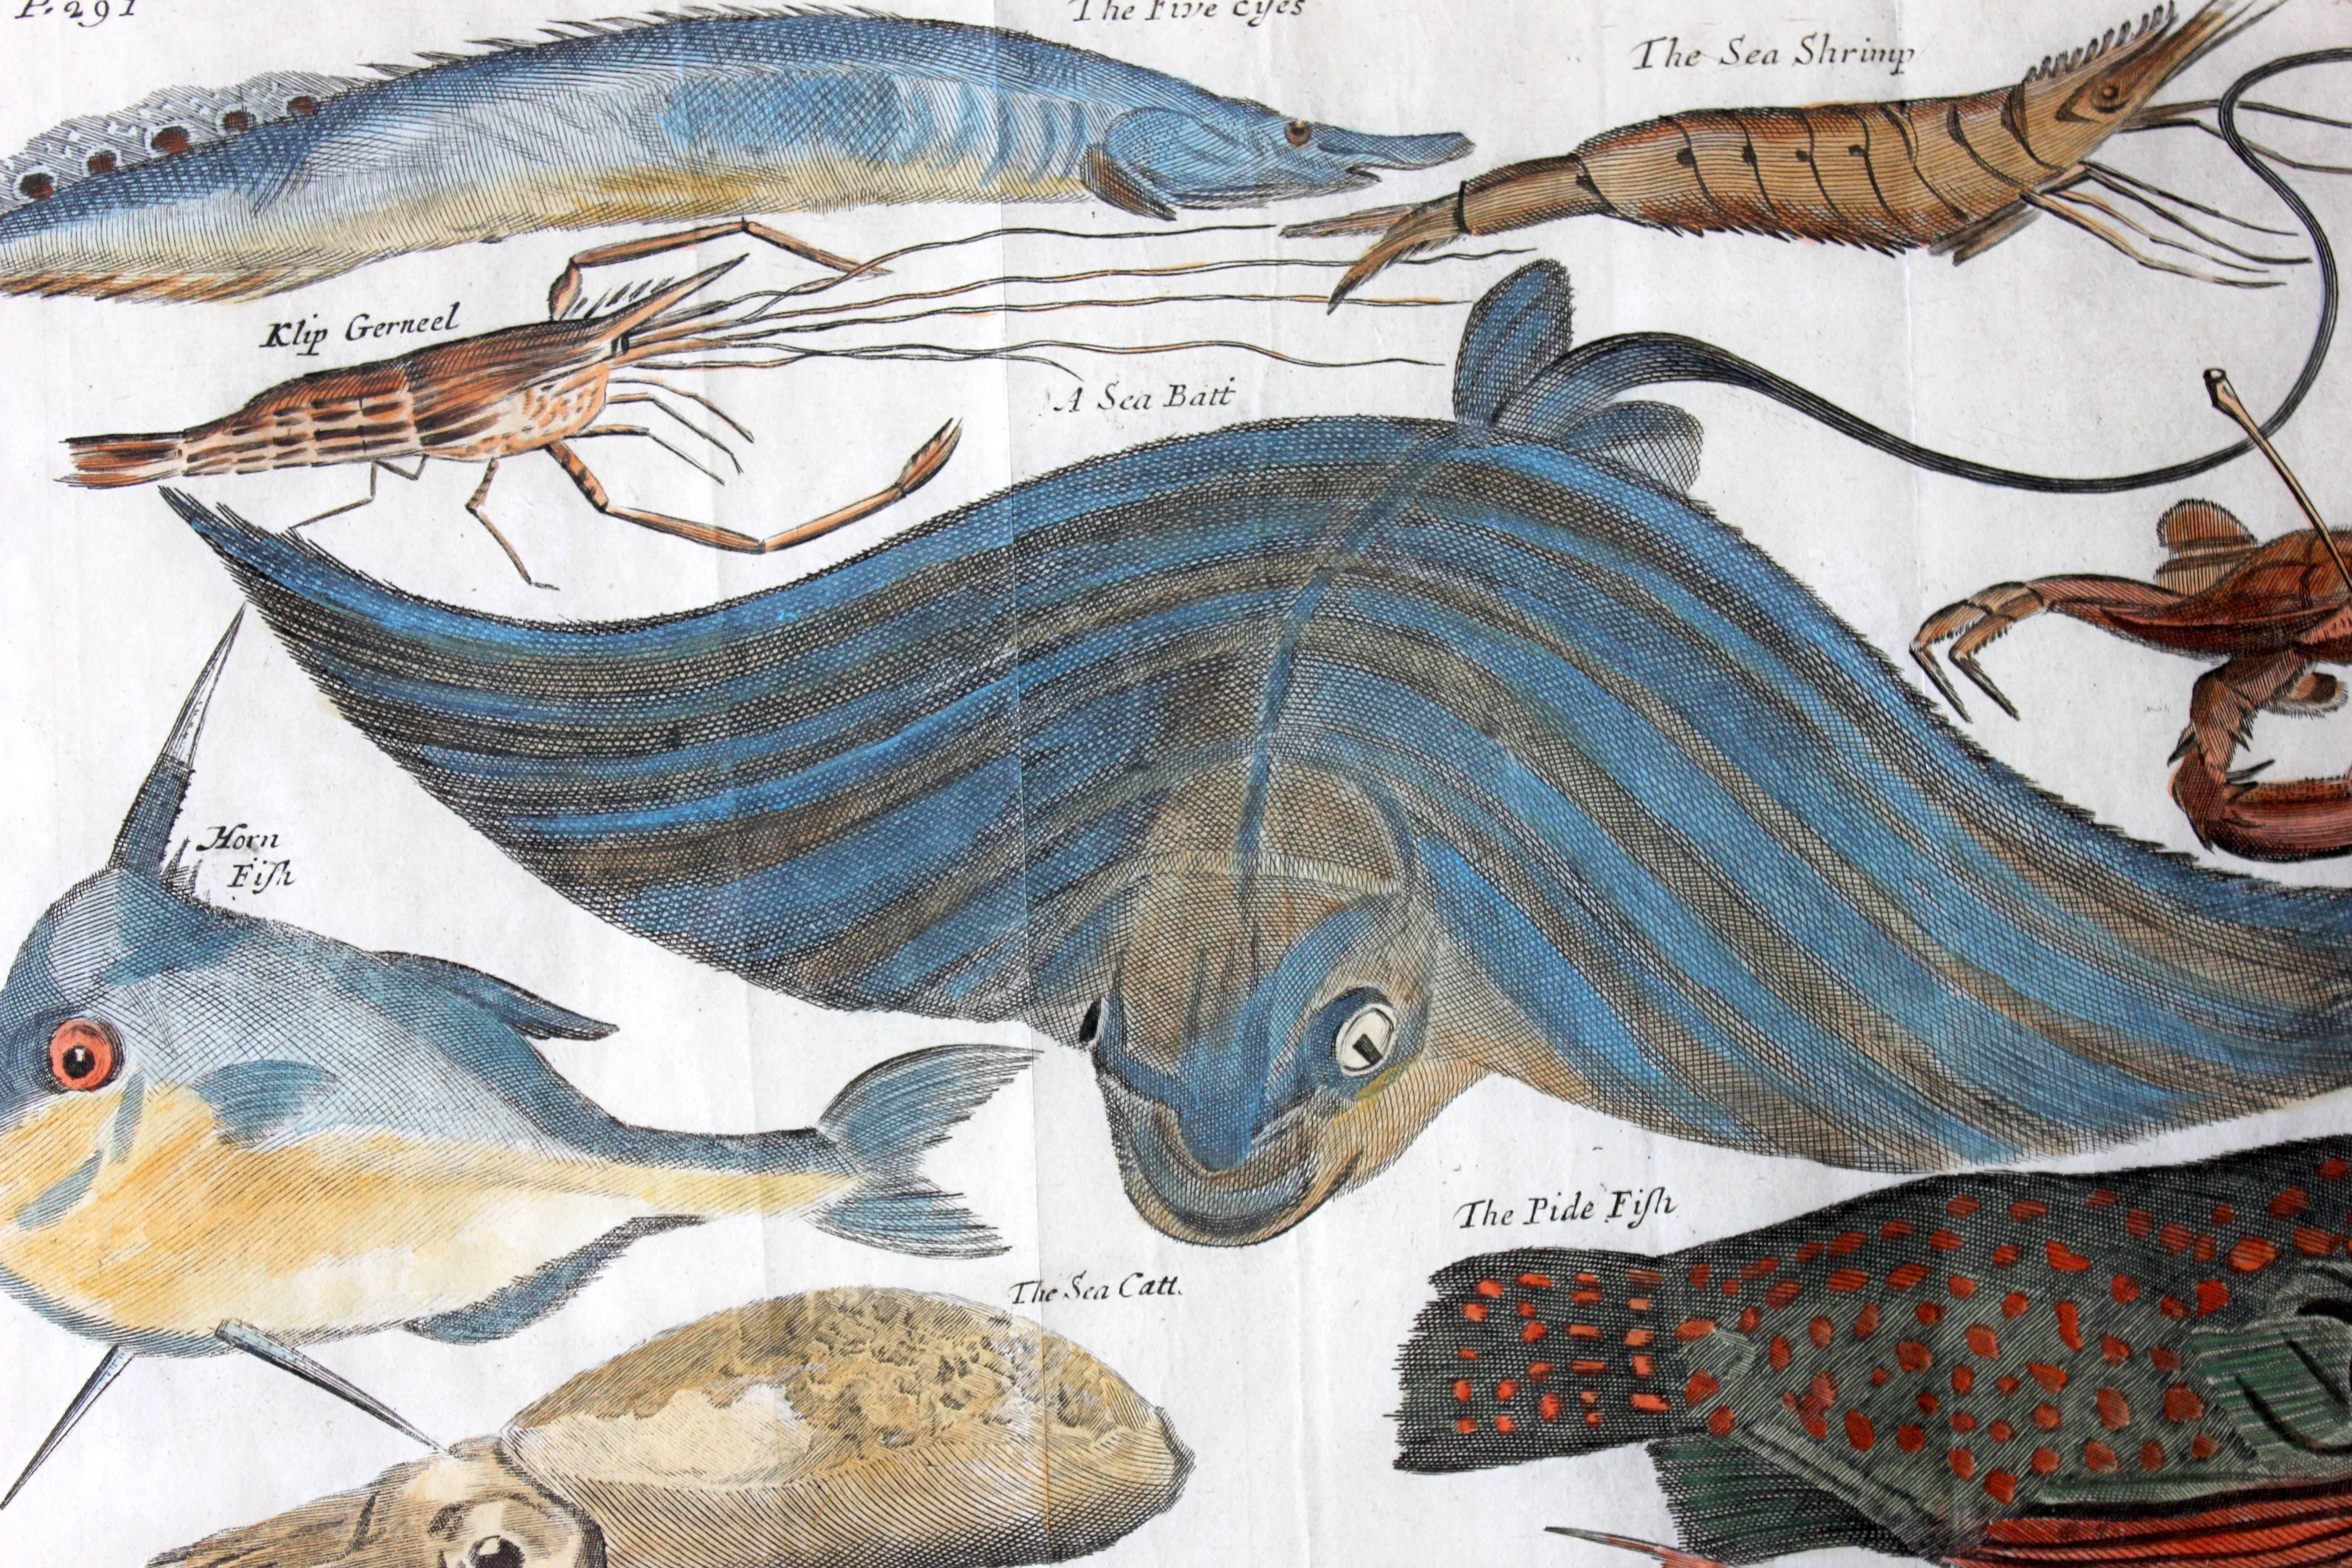 Hand-Painted Hand-Colored Copper Plates of Fish from “a Collection of Voyages and Travels